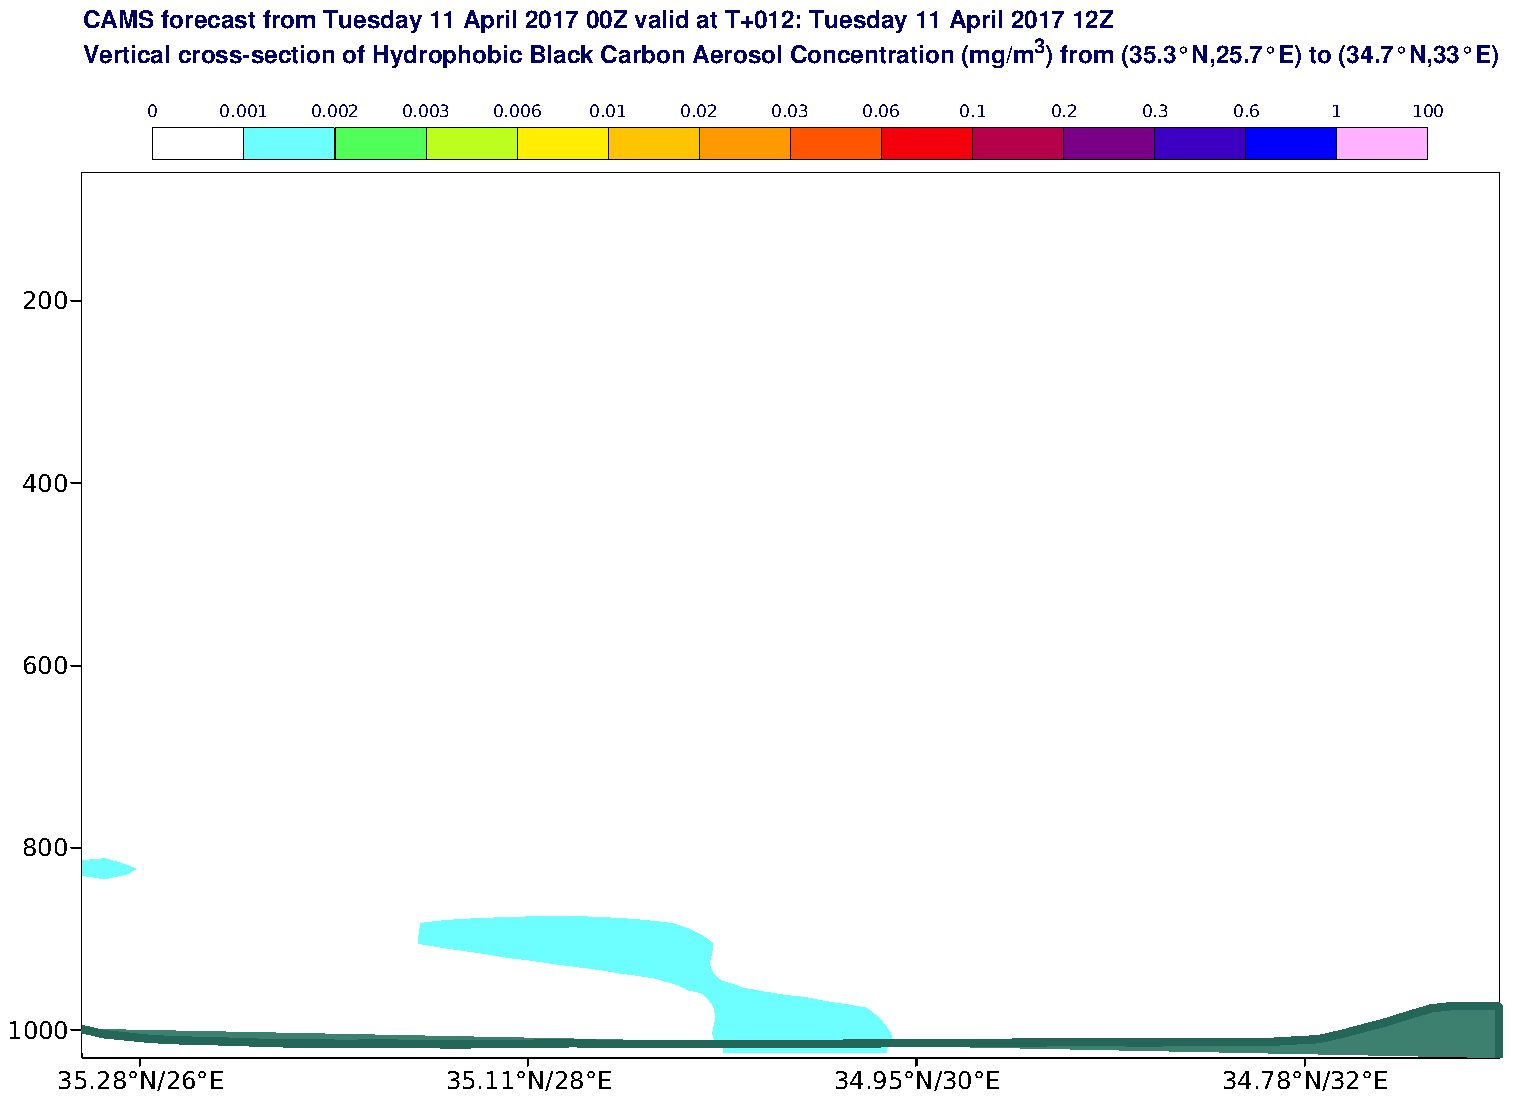 Vertical cross-section of Hydrophobic Black Carbon Aerosol Concentration (mg/m3) valid at T12 - 2017-04-11 12:00